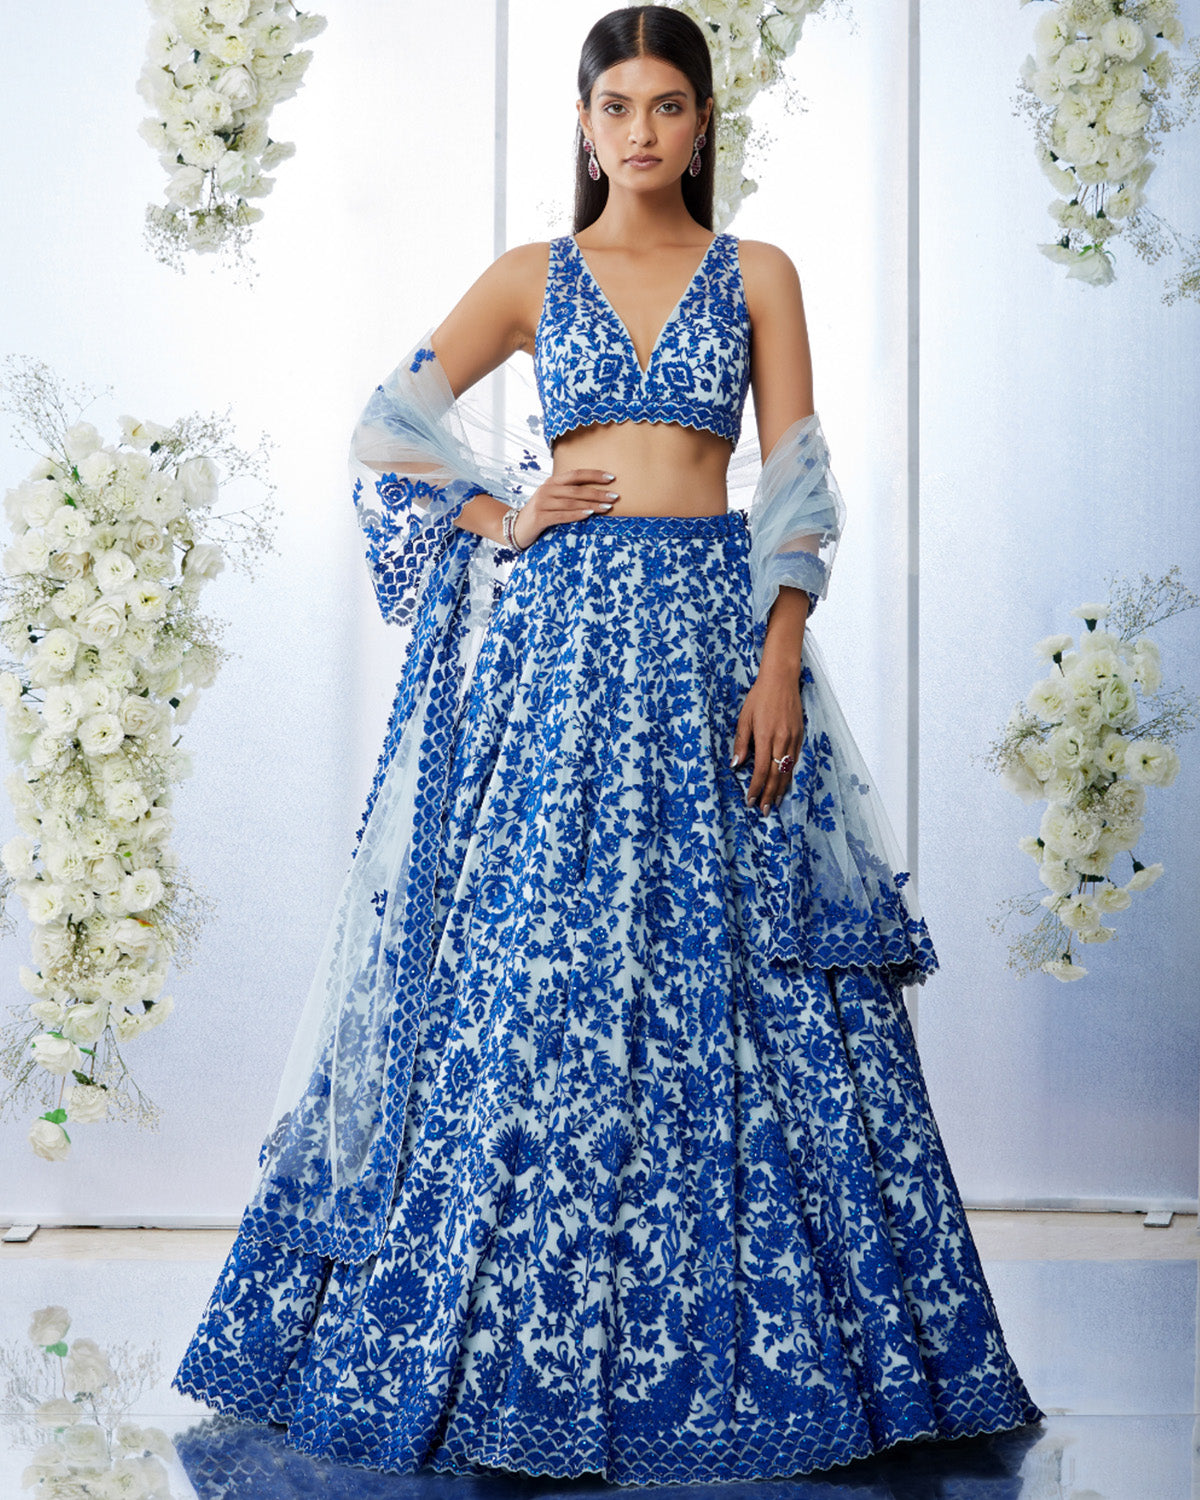 White and Blue Resham Embroidered Lehenga Set by Seema Gujral at KYNAH